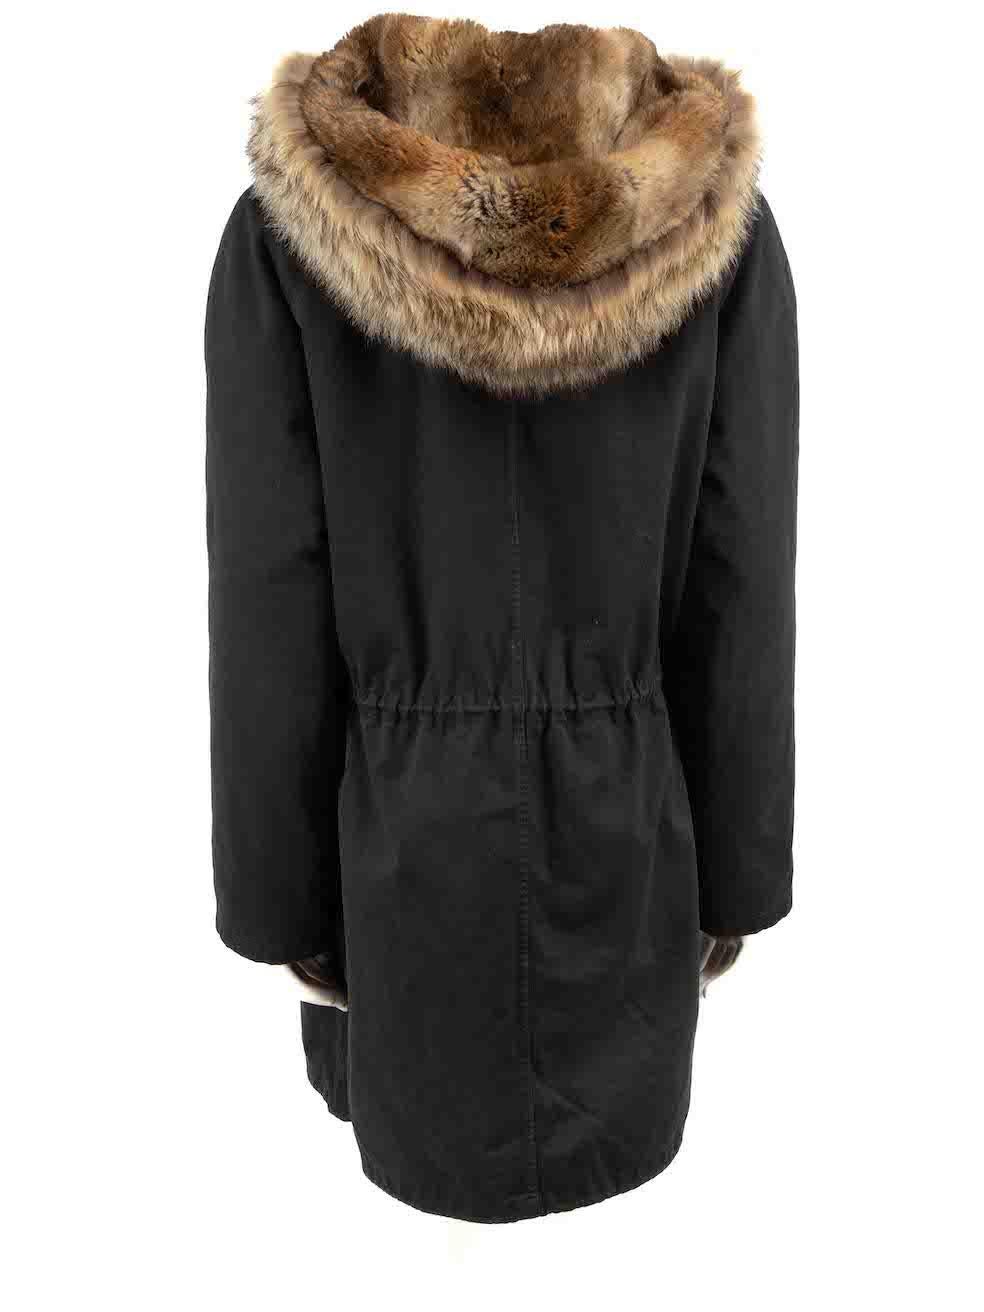 Yves Salomon Black Rabbit Fur Lined Parka Coat Size M In Good Condition For Sale In London, GB